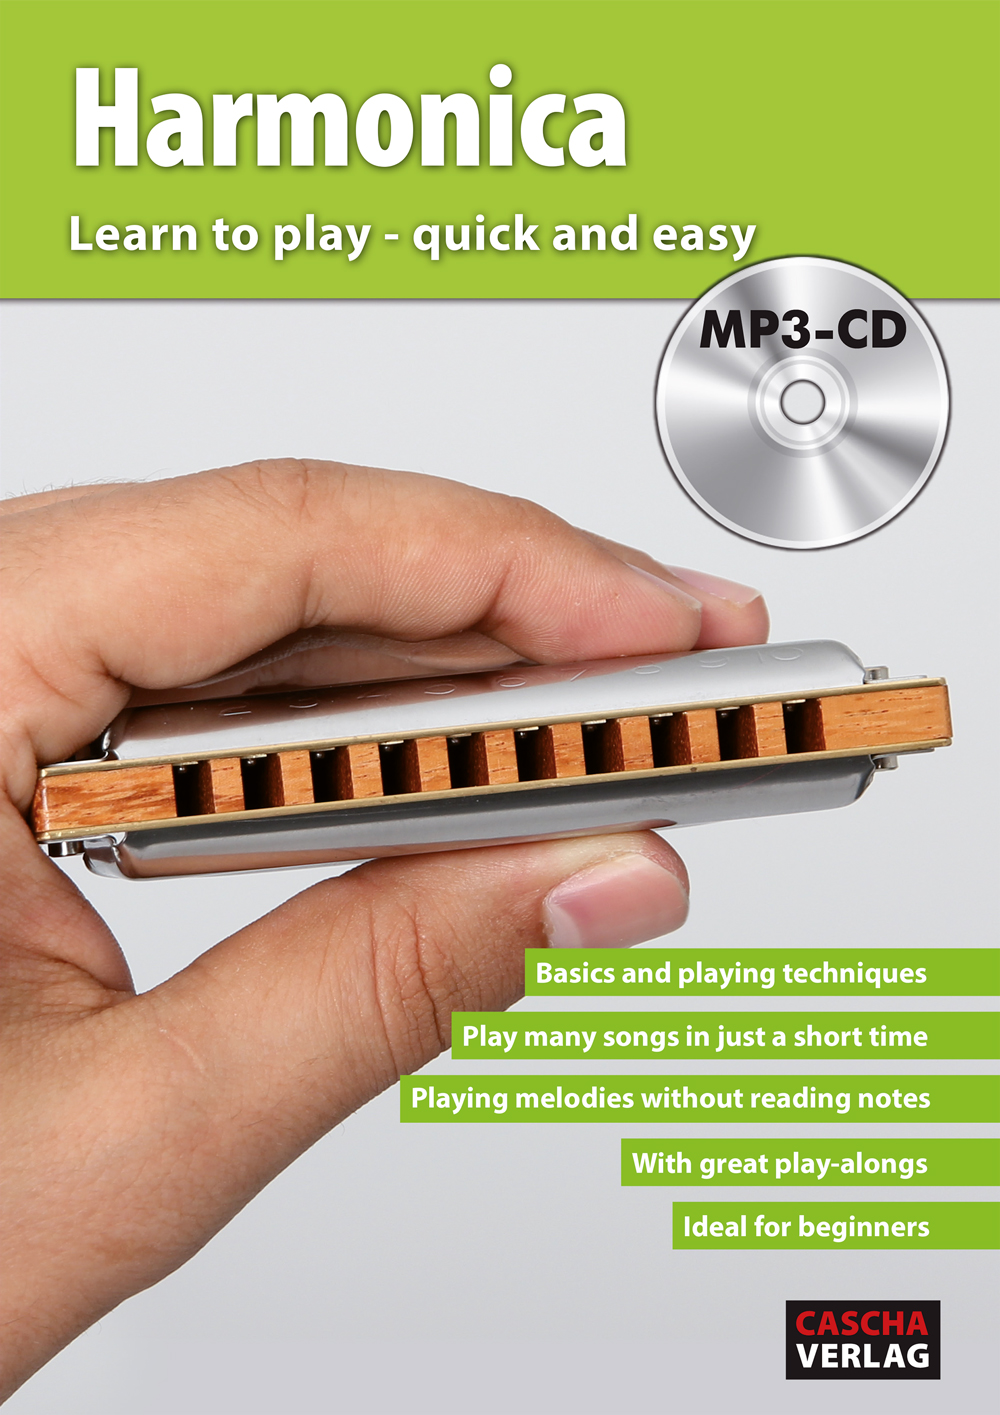 Harmonica - Learn to play quick and easy